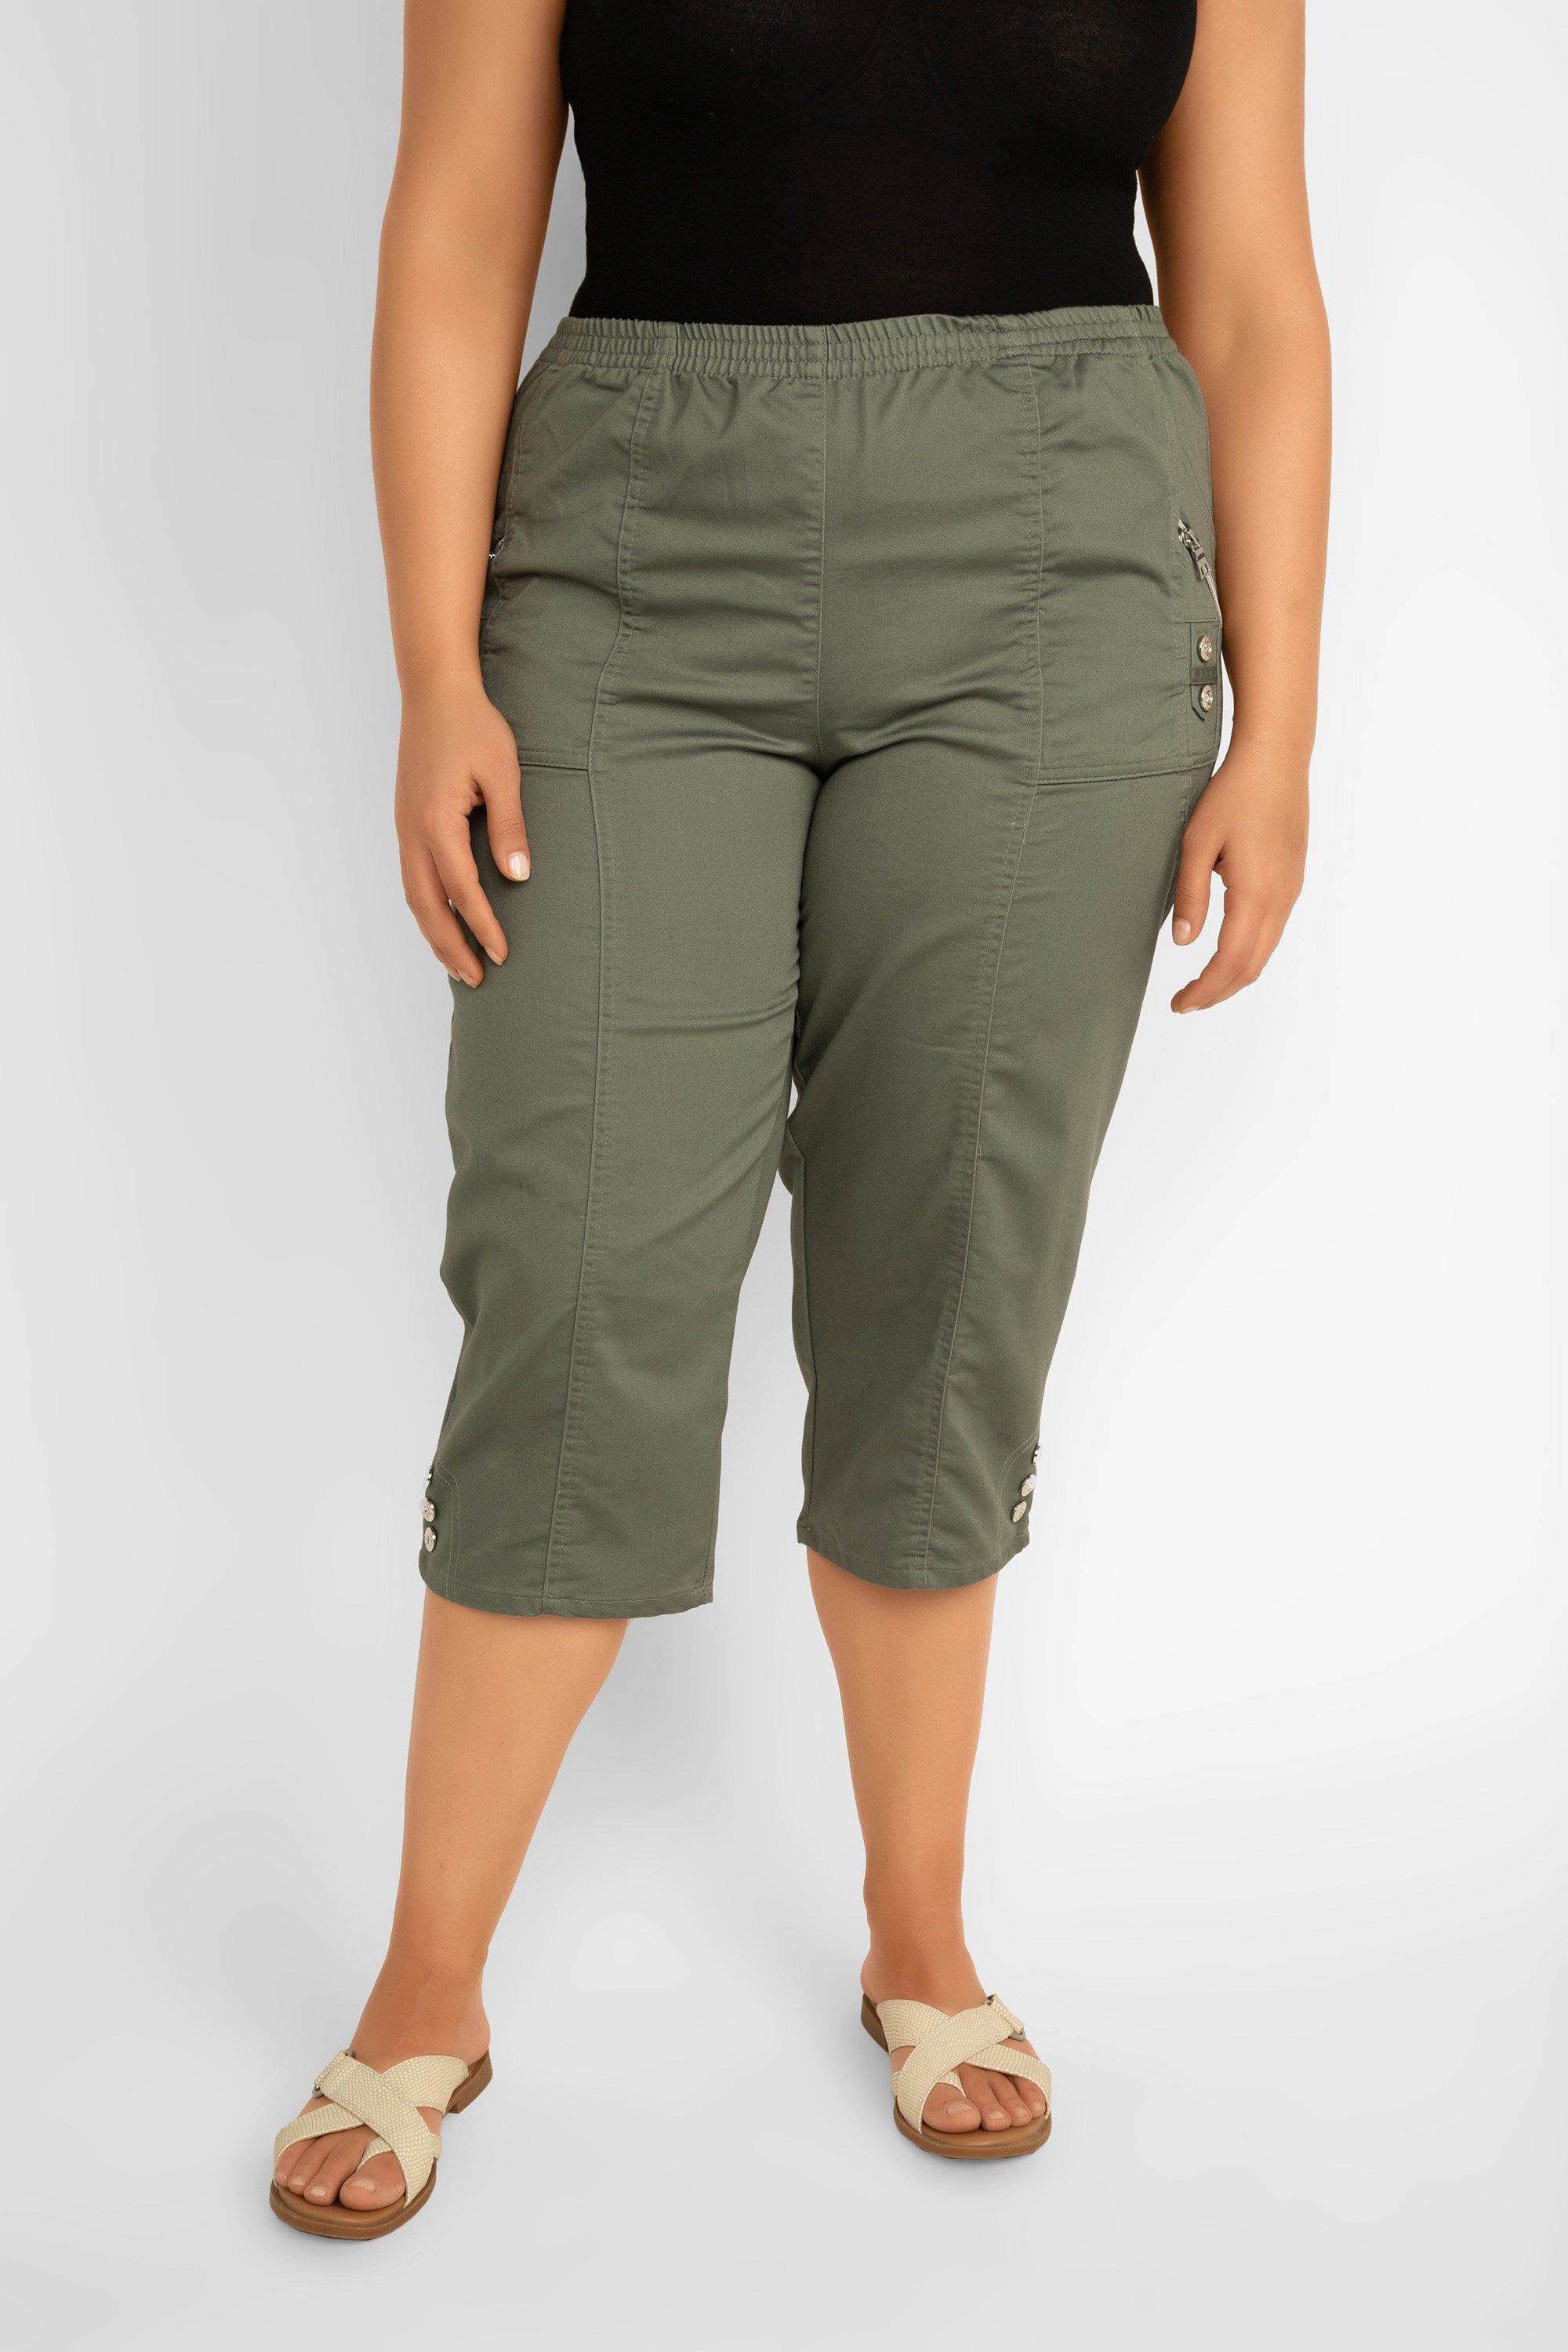 Soya Concept (17197) Women's Pull On Capris Pants With Button & Zipper Detail and Pockets in Misty Green